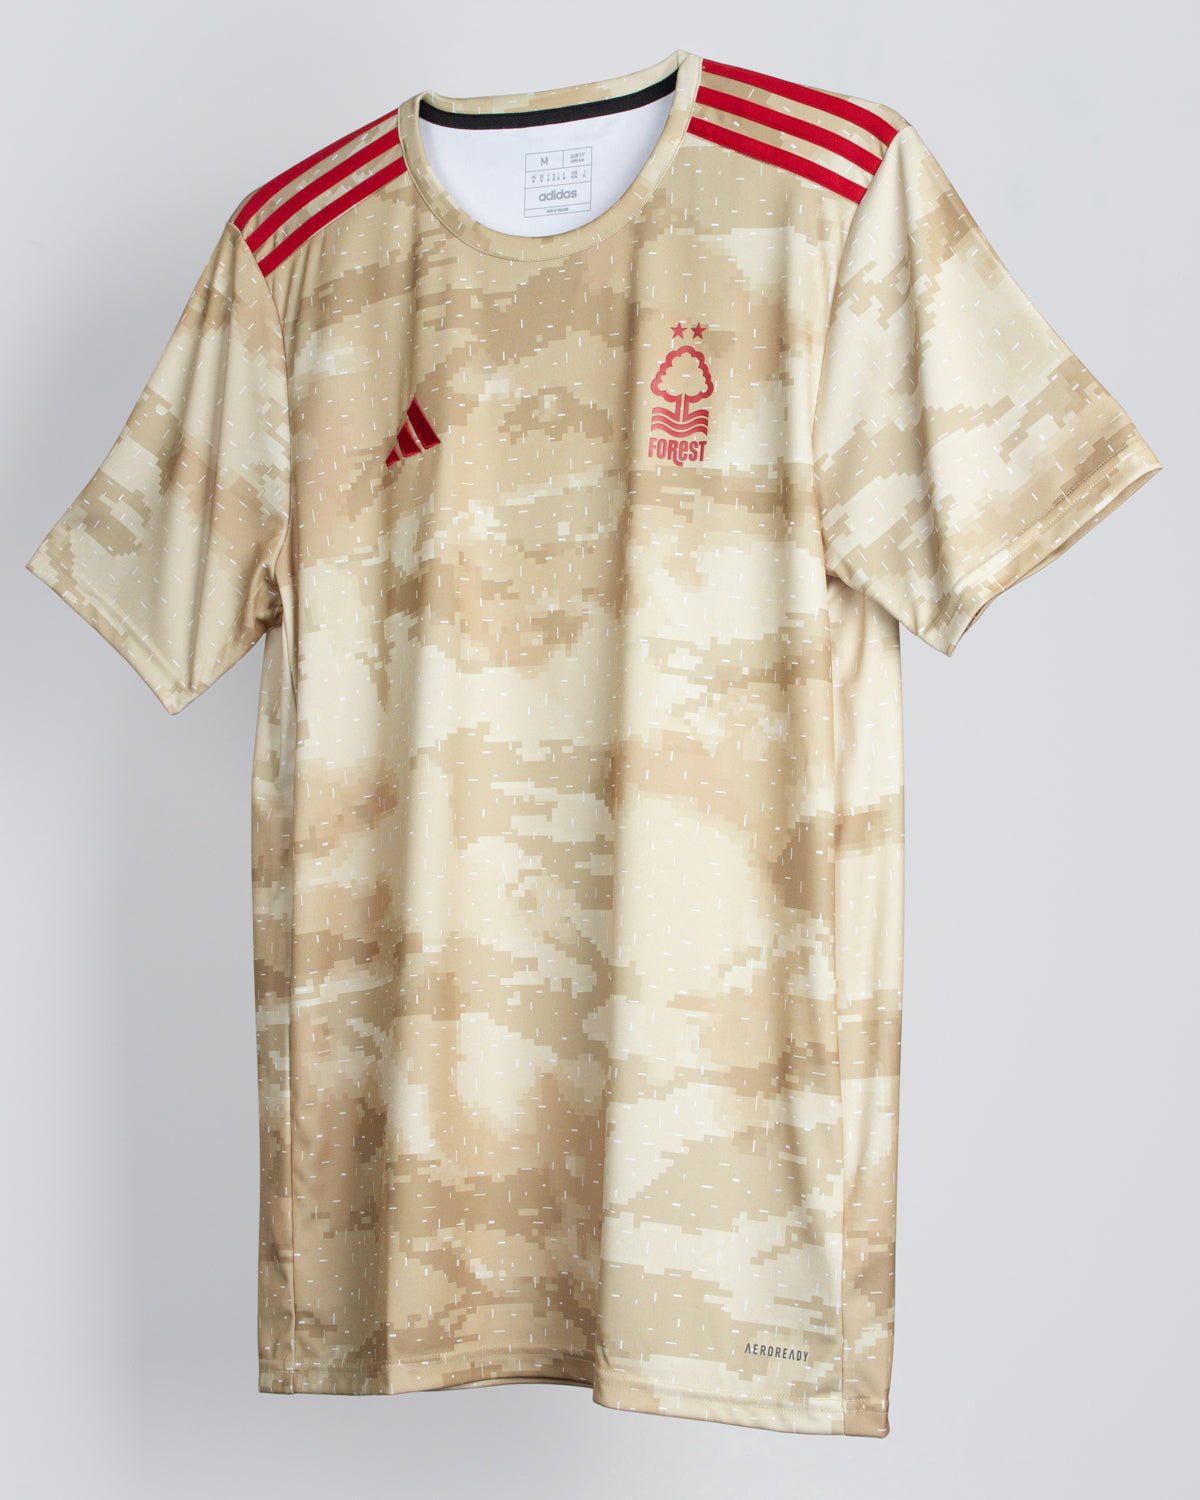 NFFC Junior Limited Edition Warm Up Jersey 23-24 - Nottingham Forest FC